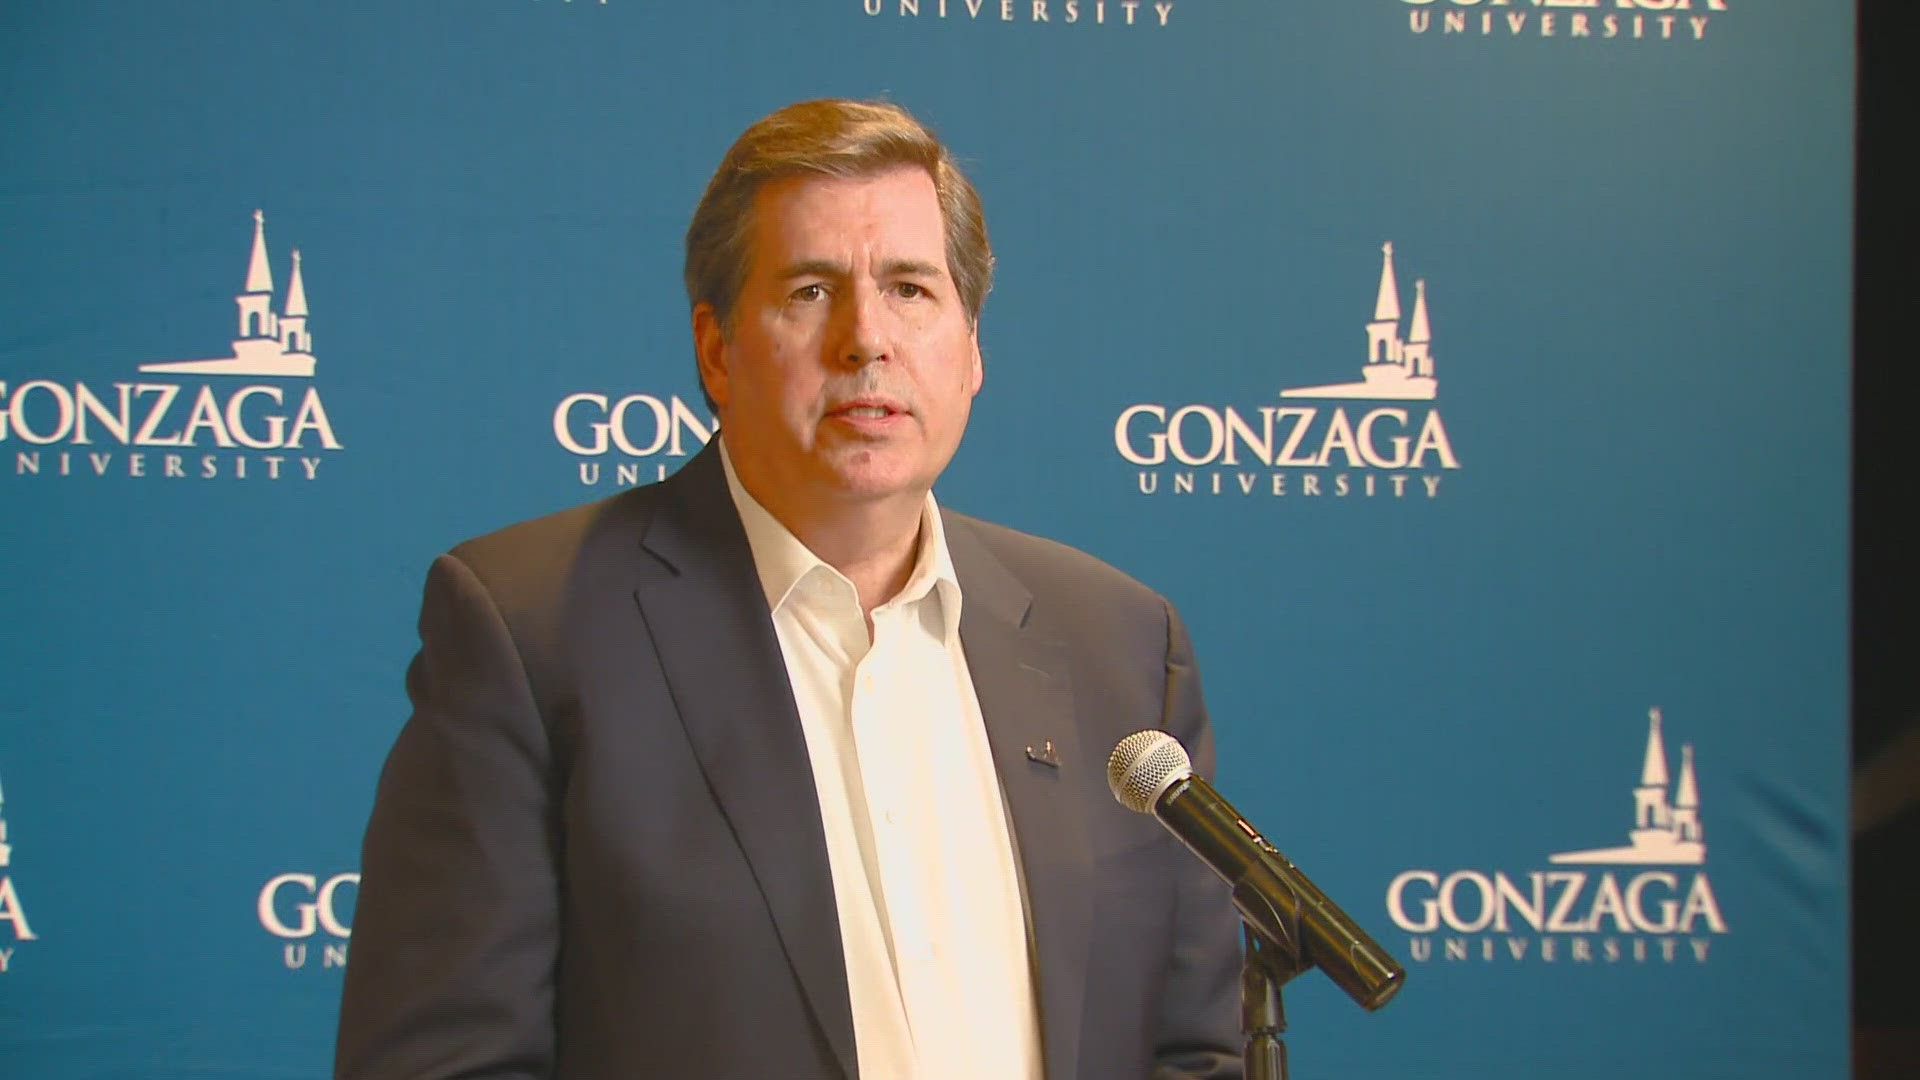 McCulloh has been worked at Gonzaga for over 30 years and has been the university’s president since 2009.